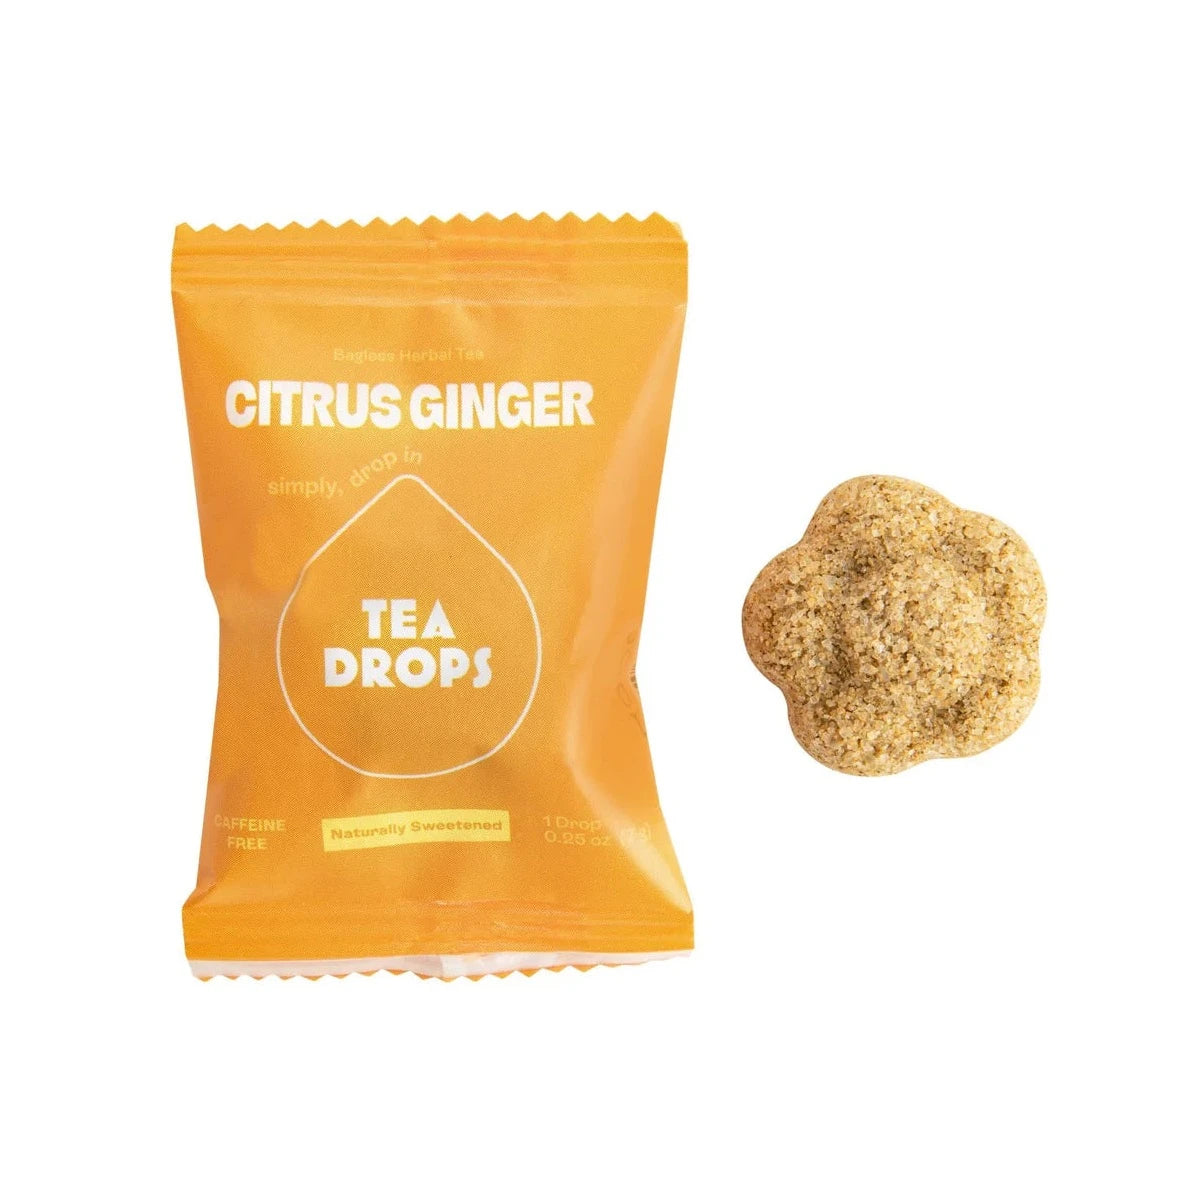 bright yellow tea drop packaging with white text. compressed tea flower next to it